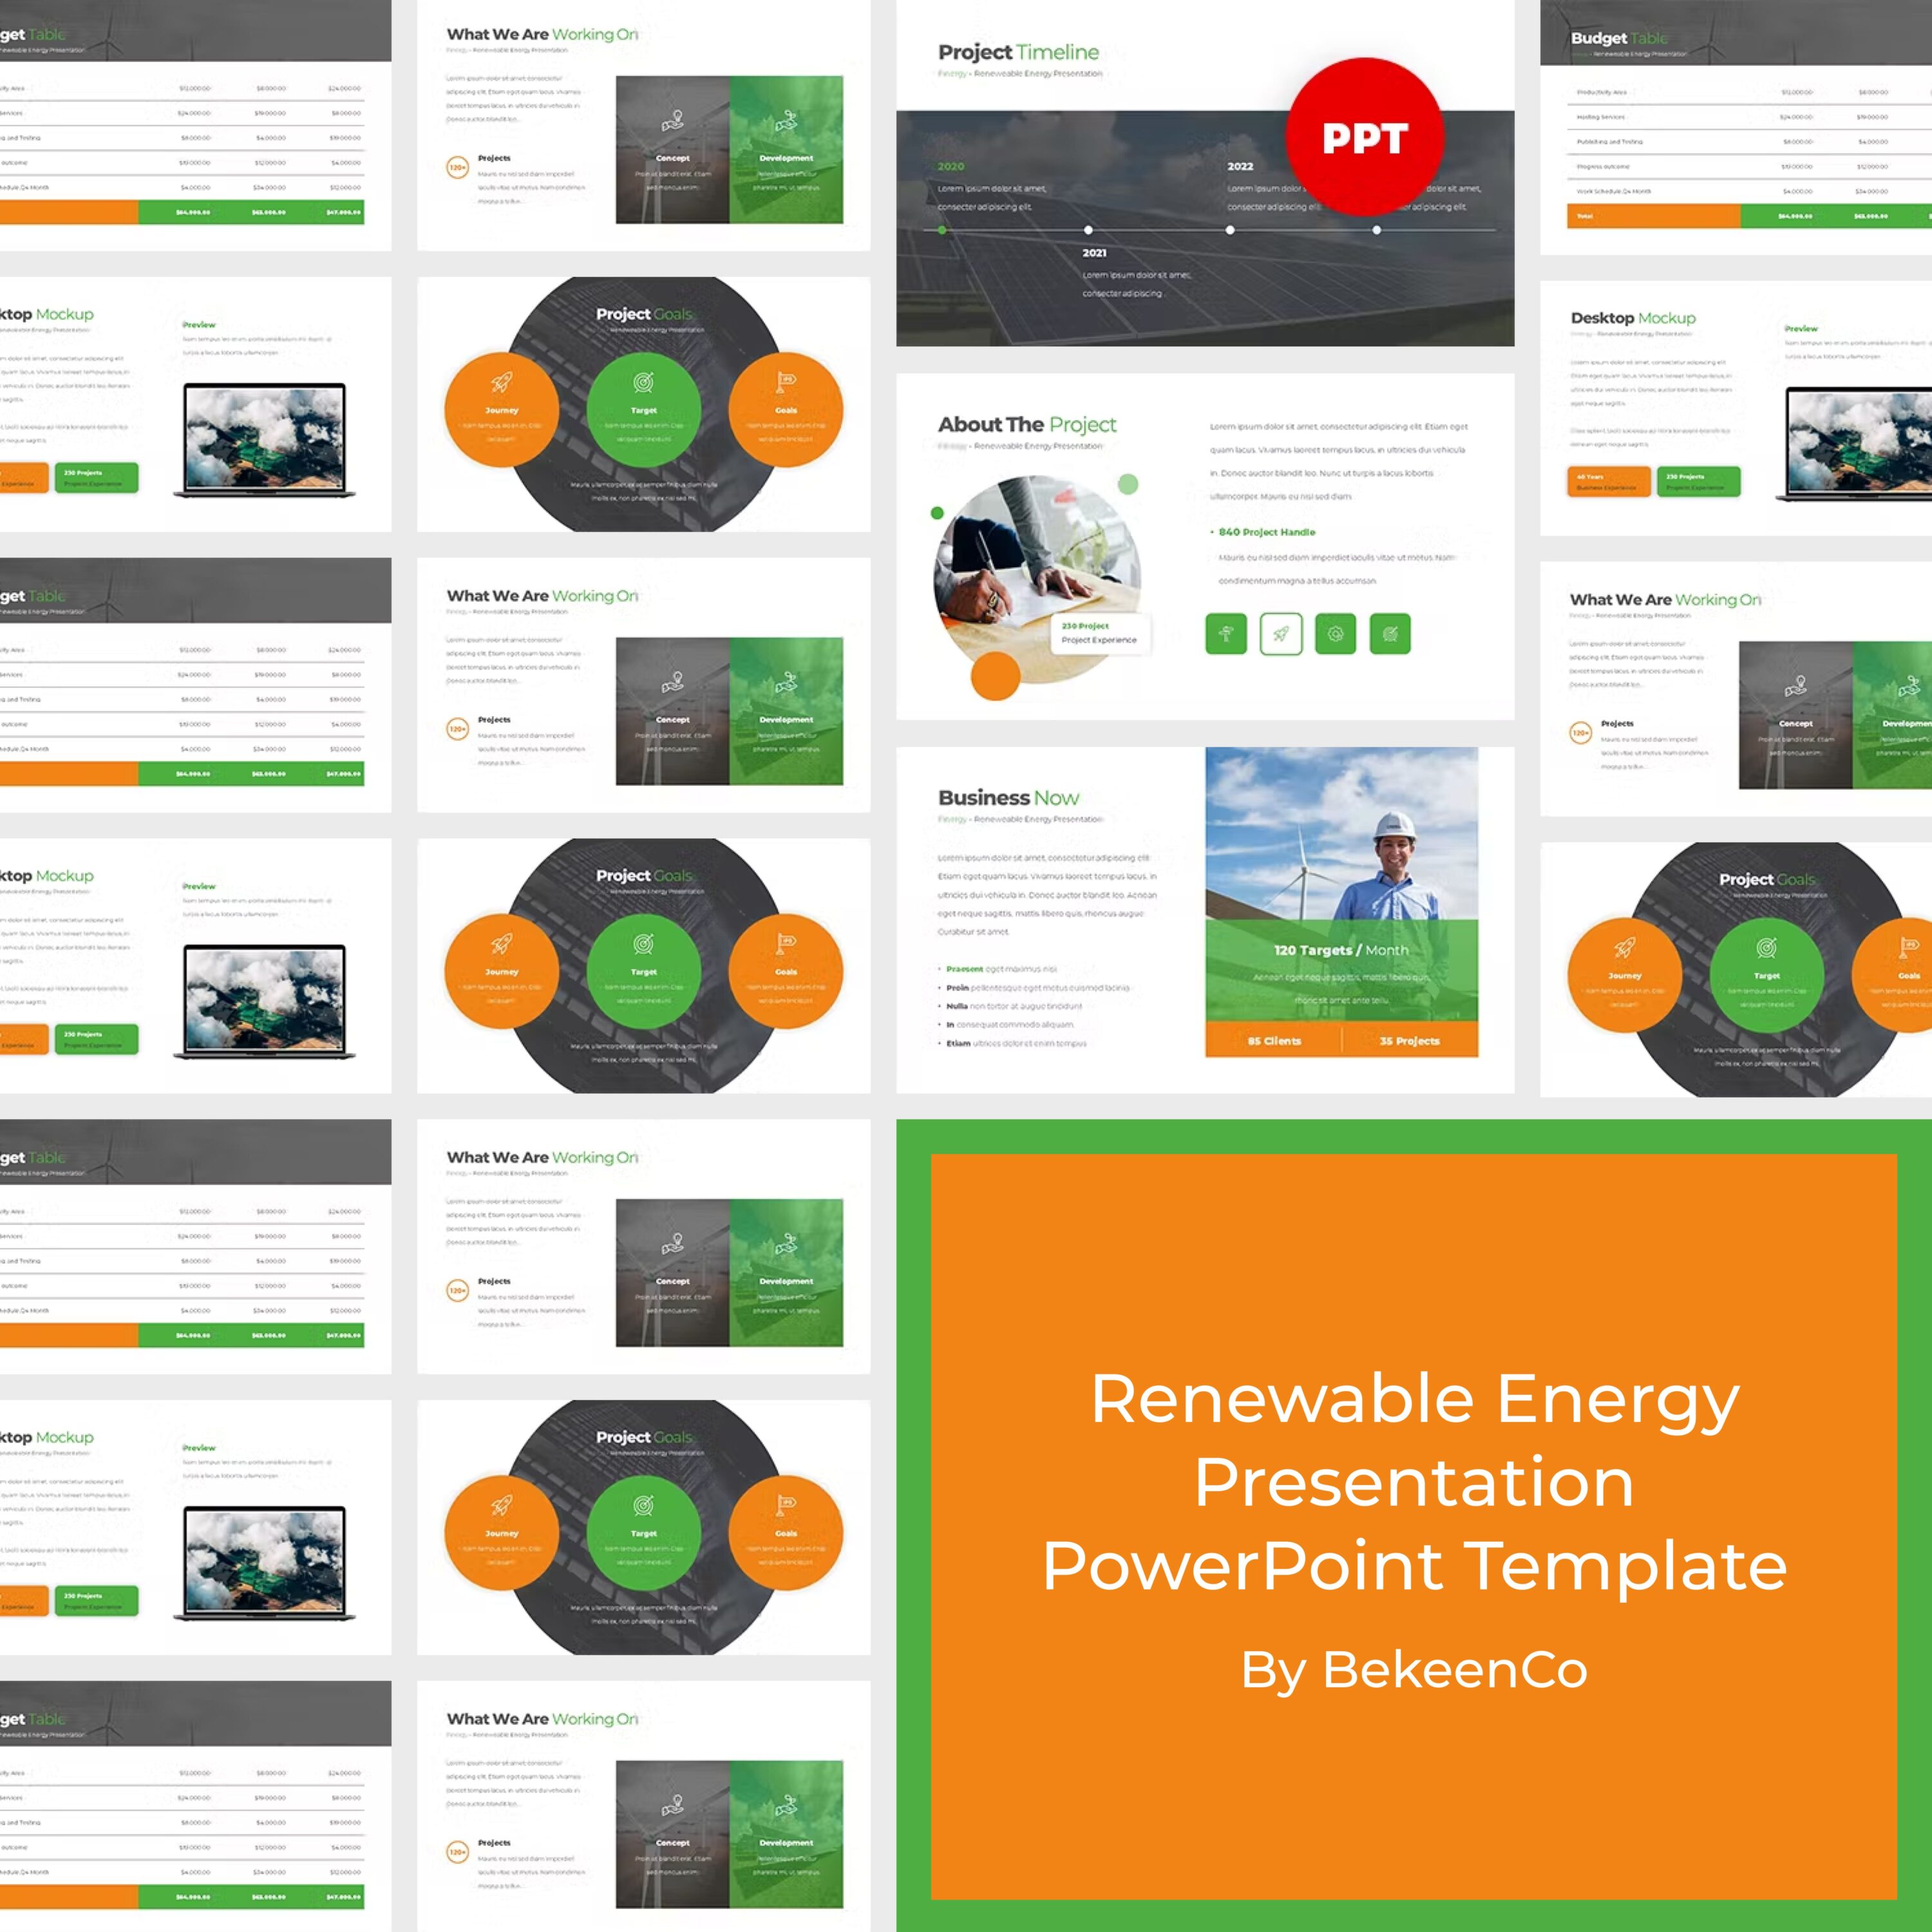 Finergy Renewable Energy Presentation Template - main image preview.